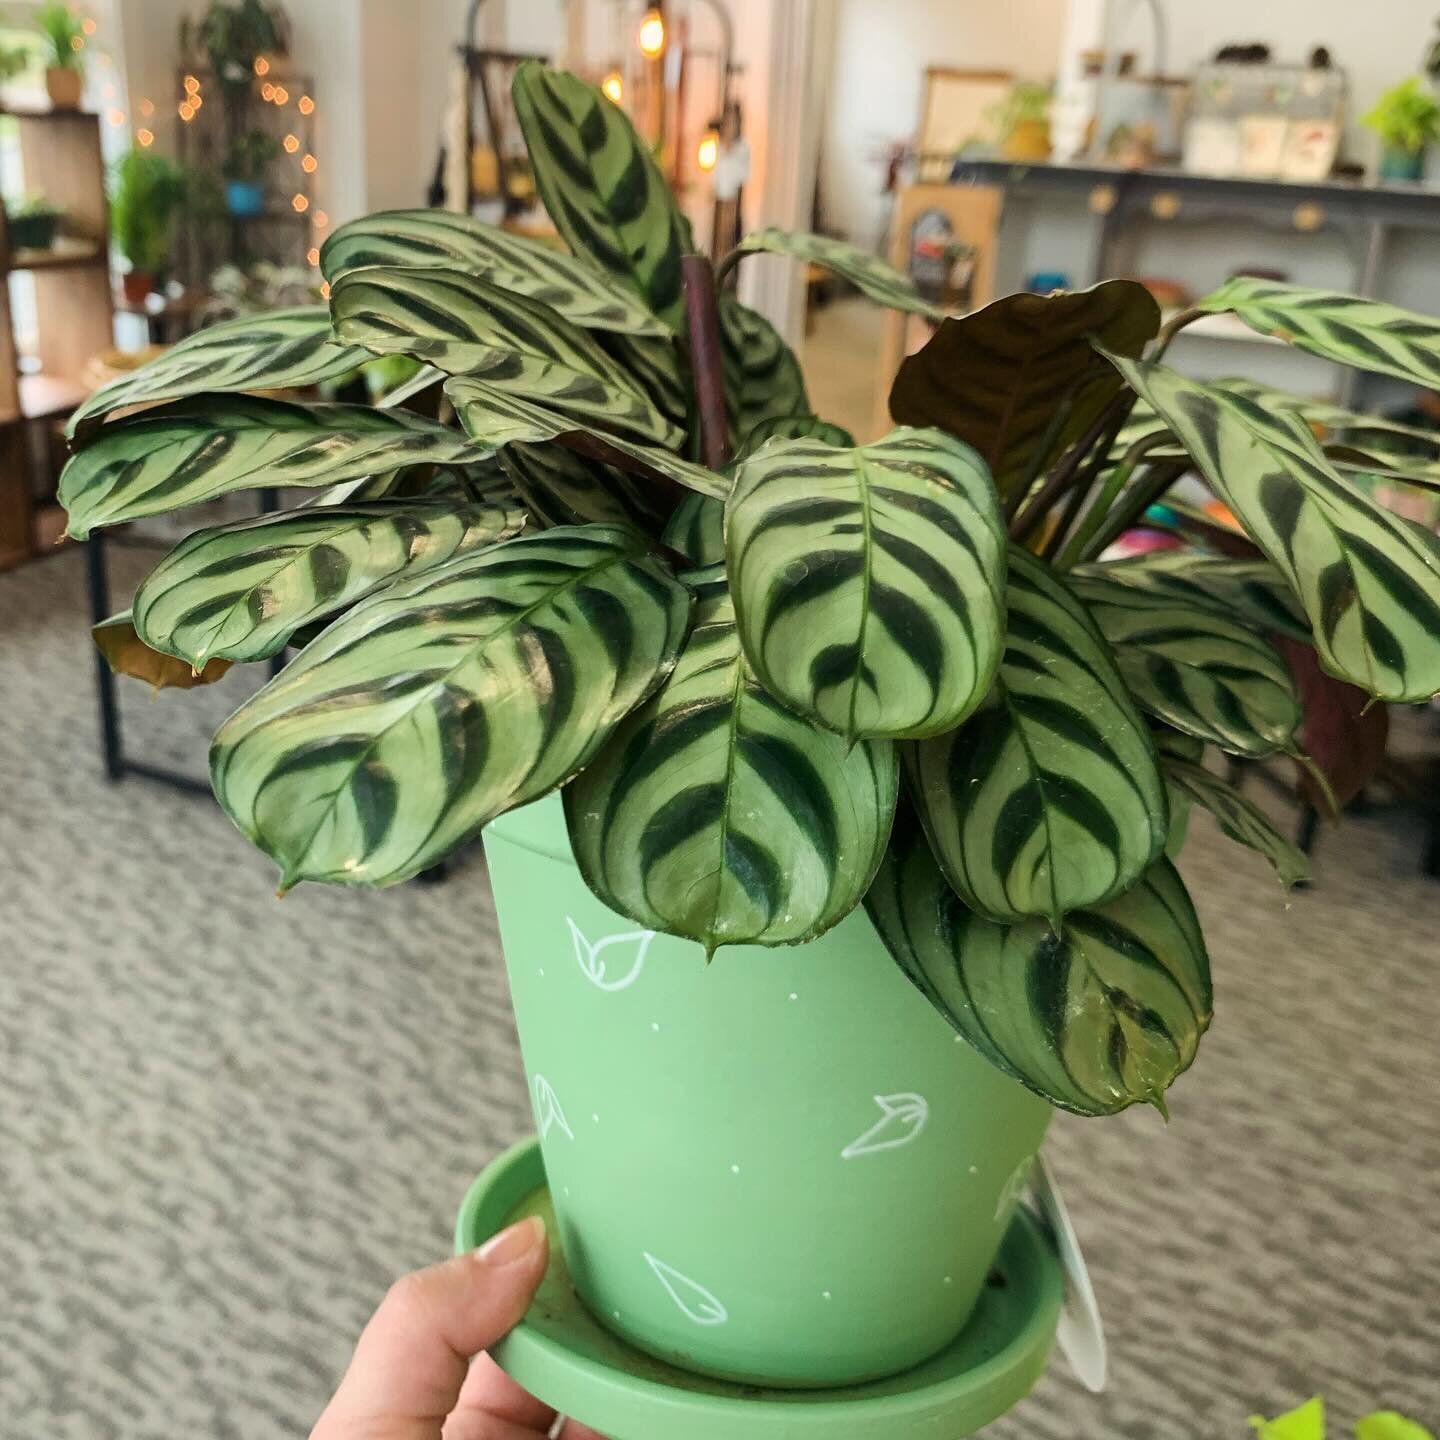 🌱Ctenanthe Burle Marxii in a @plandadesign planter 😍
Open 10-5p Today

#smallbusiness #shoplocal #queerowned #lgbtq #houseplants #greenvibes #prana #newton #boston #oneofakind #handpainted